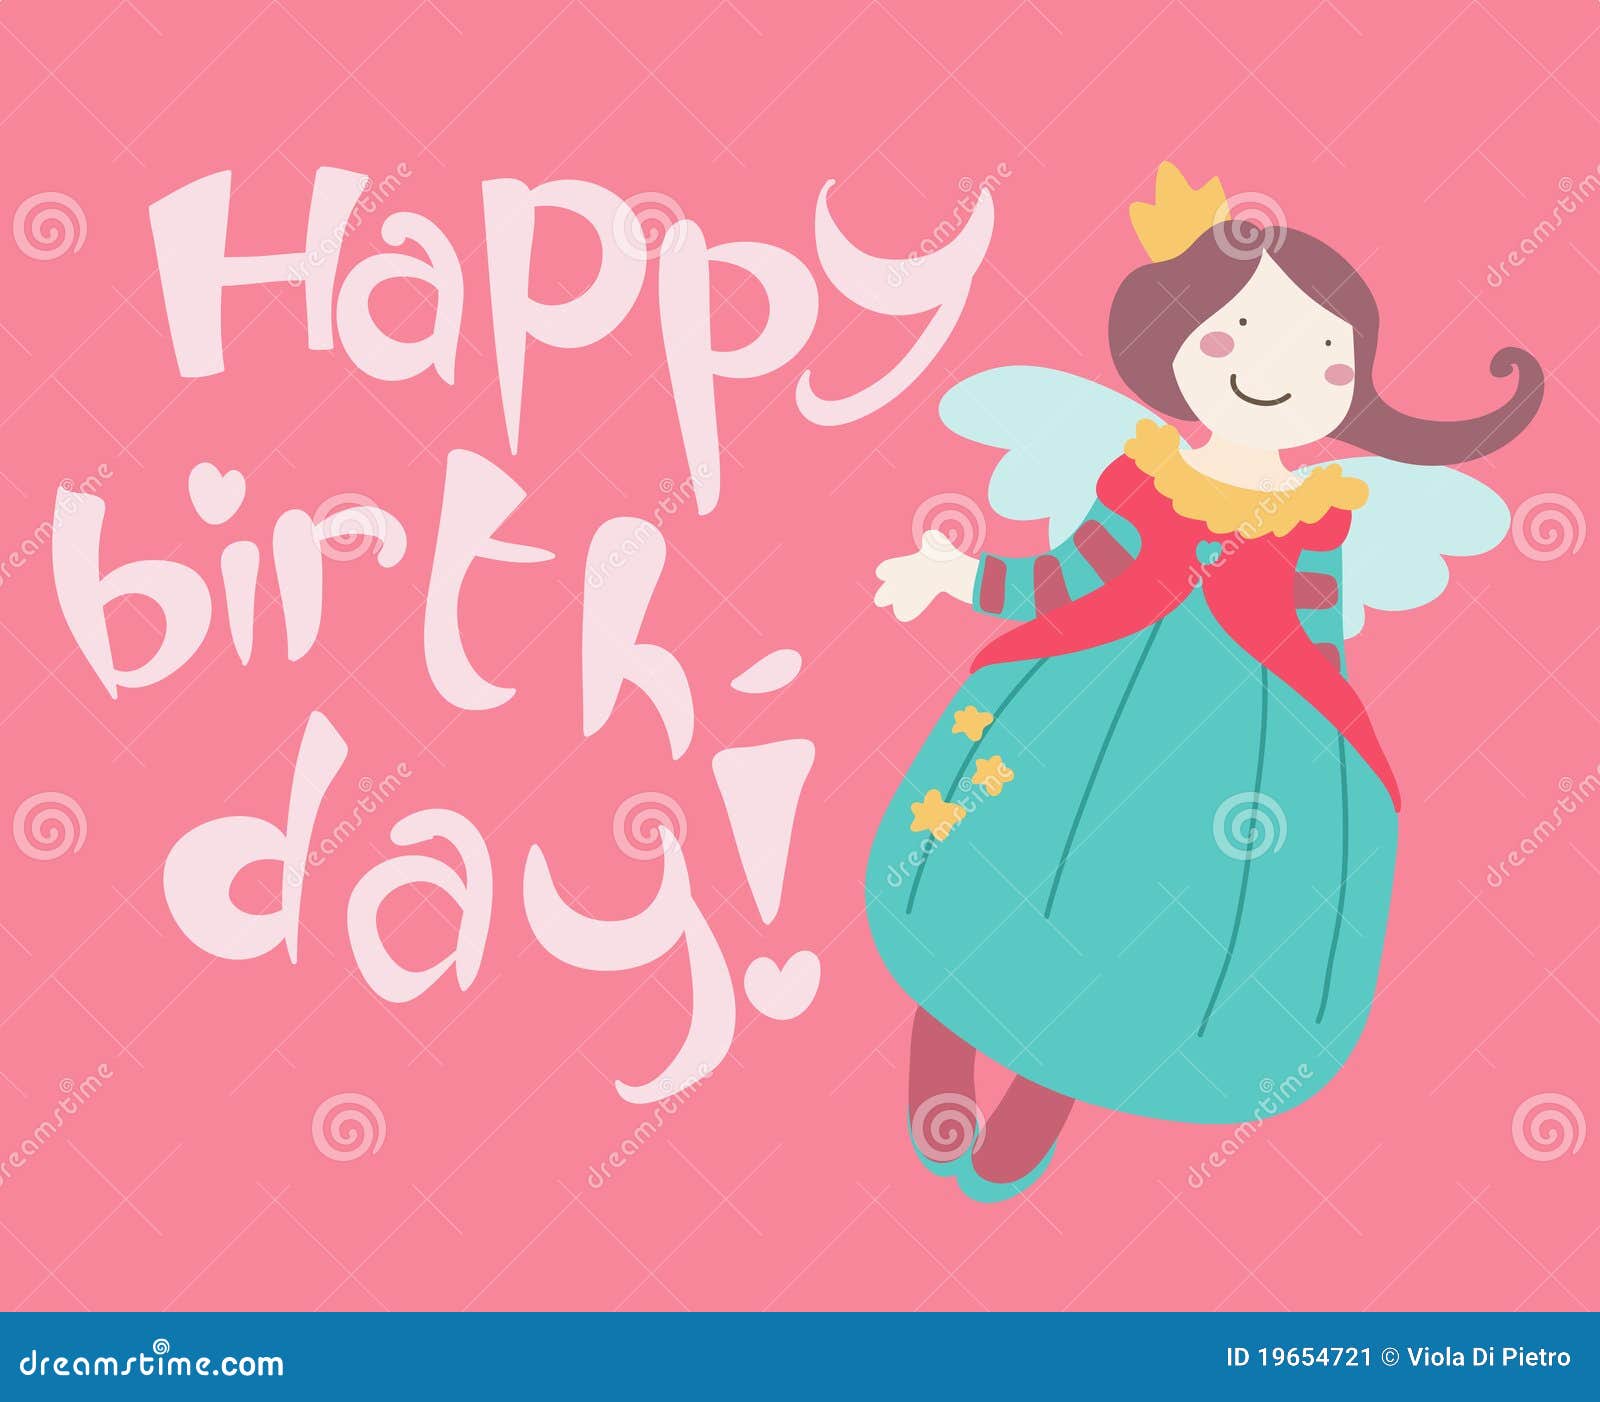 Cute Smiling Fairy Happy Birtdhay Card Stock Vector - Illustration of ...